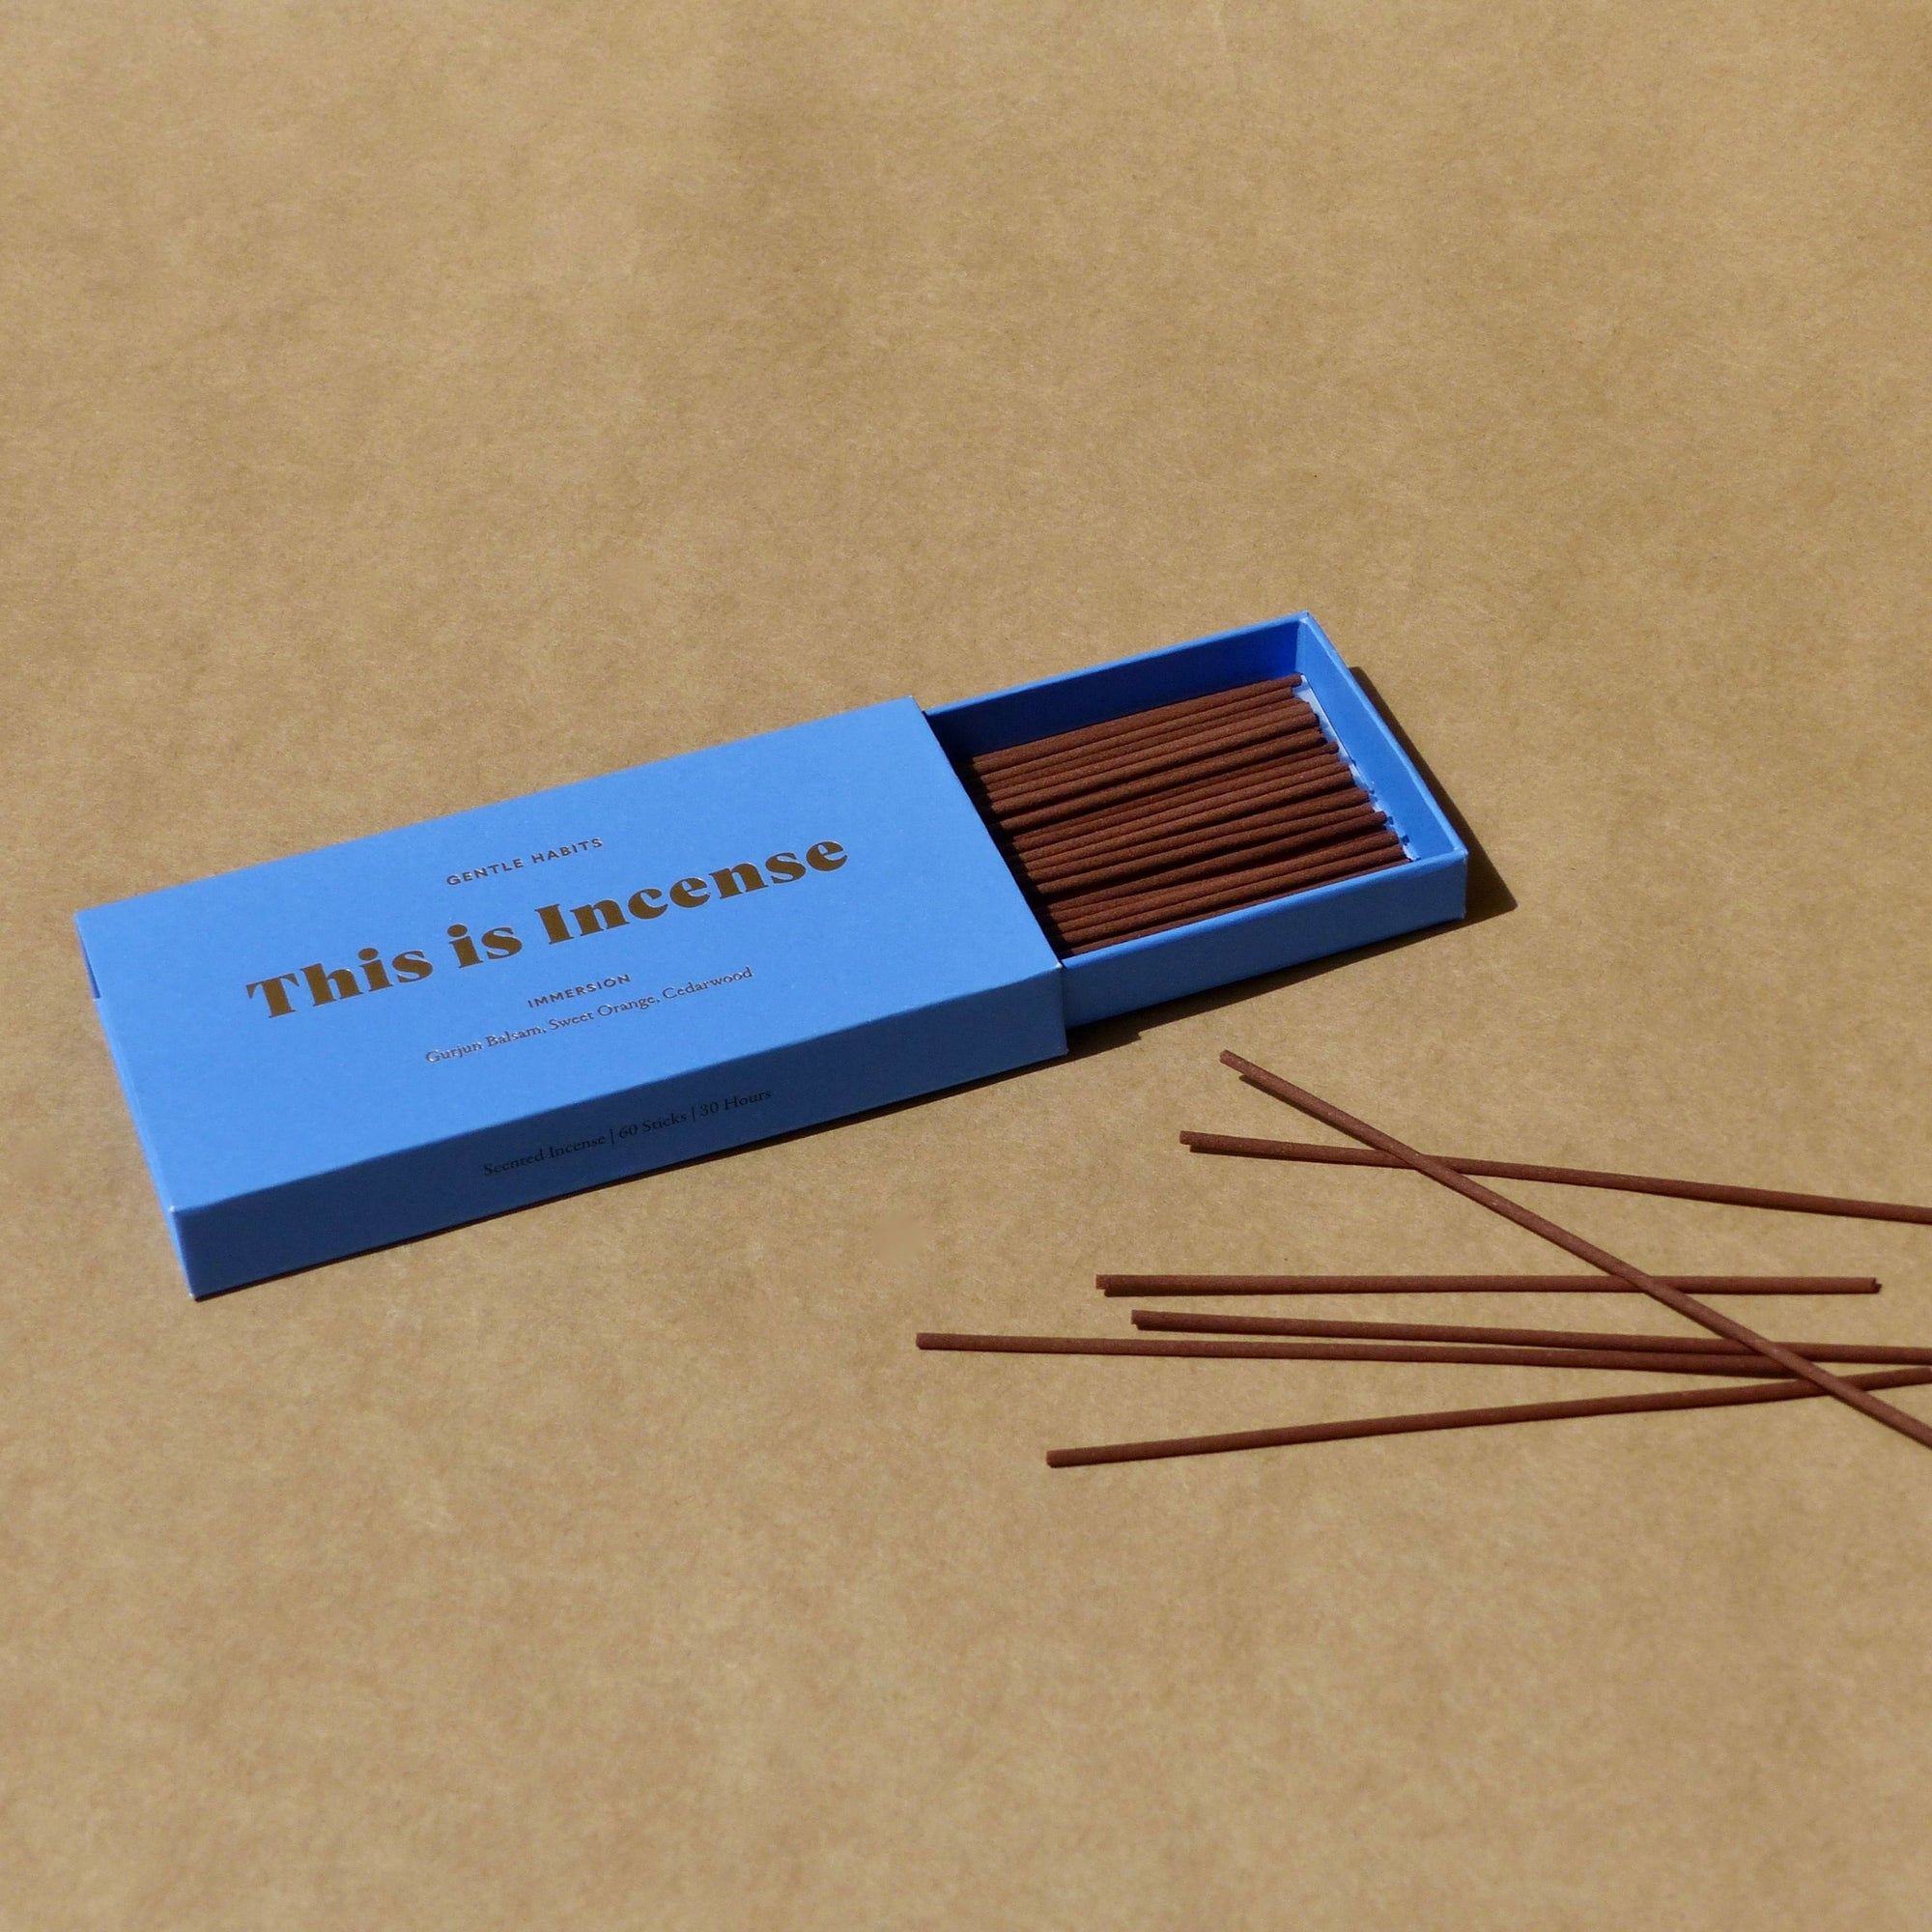 THIS IS INCENSE: IMMERSION